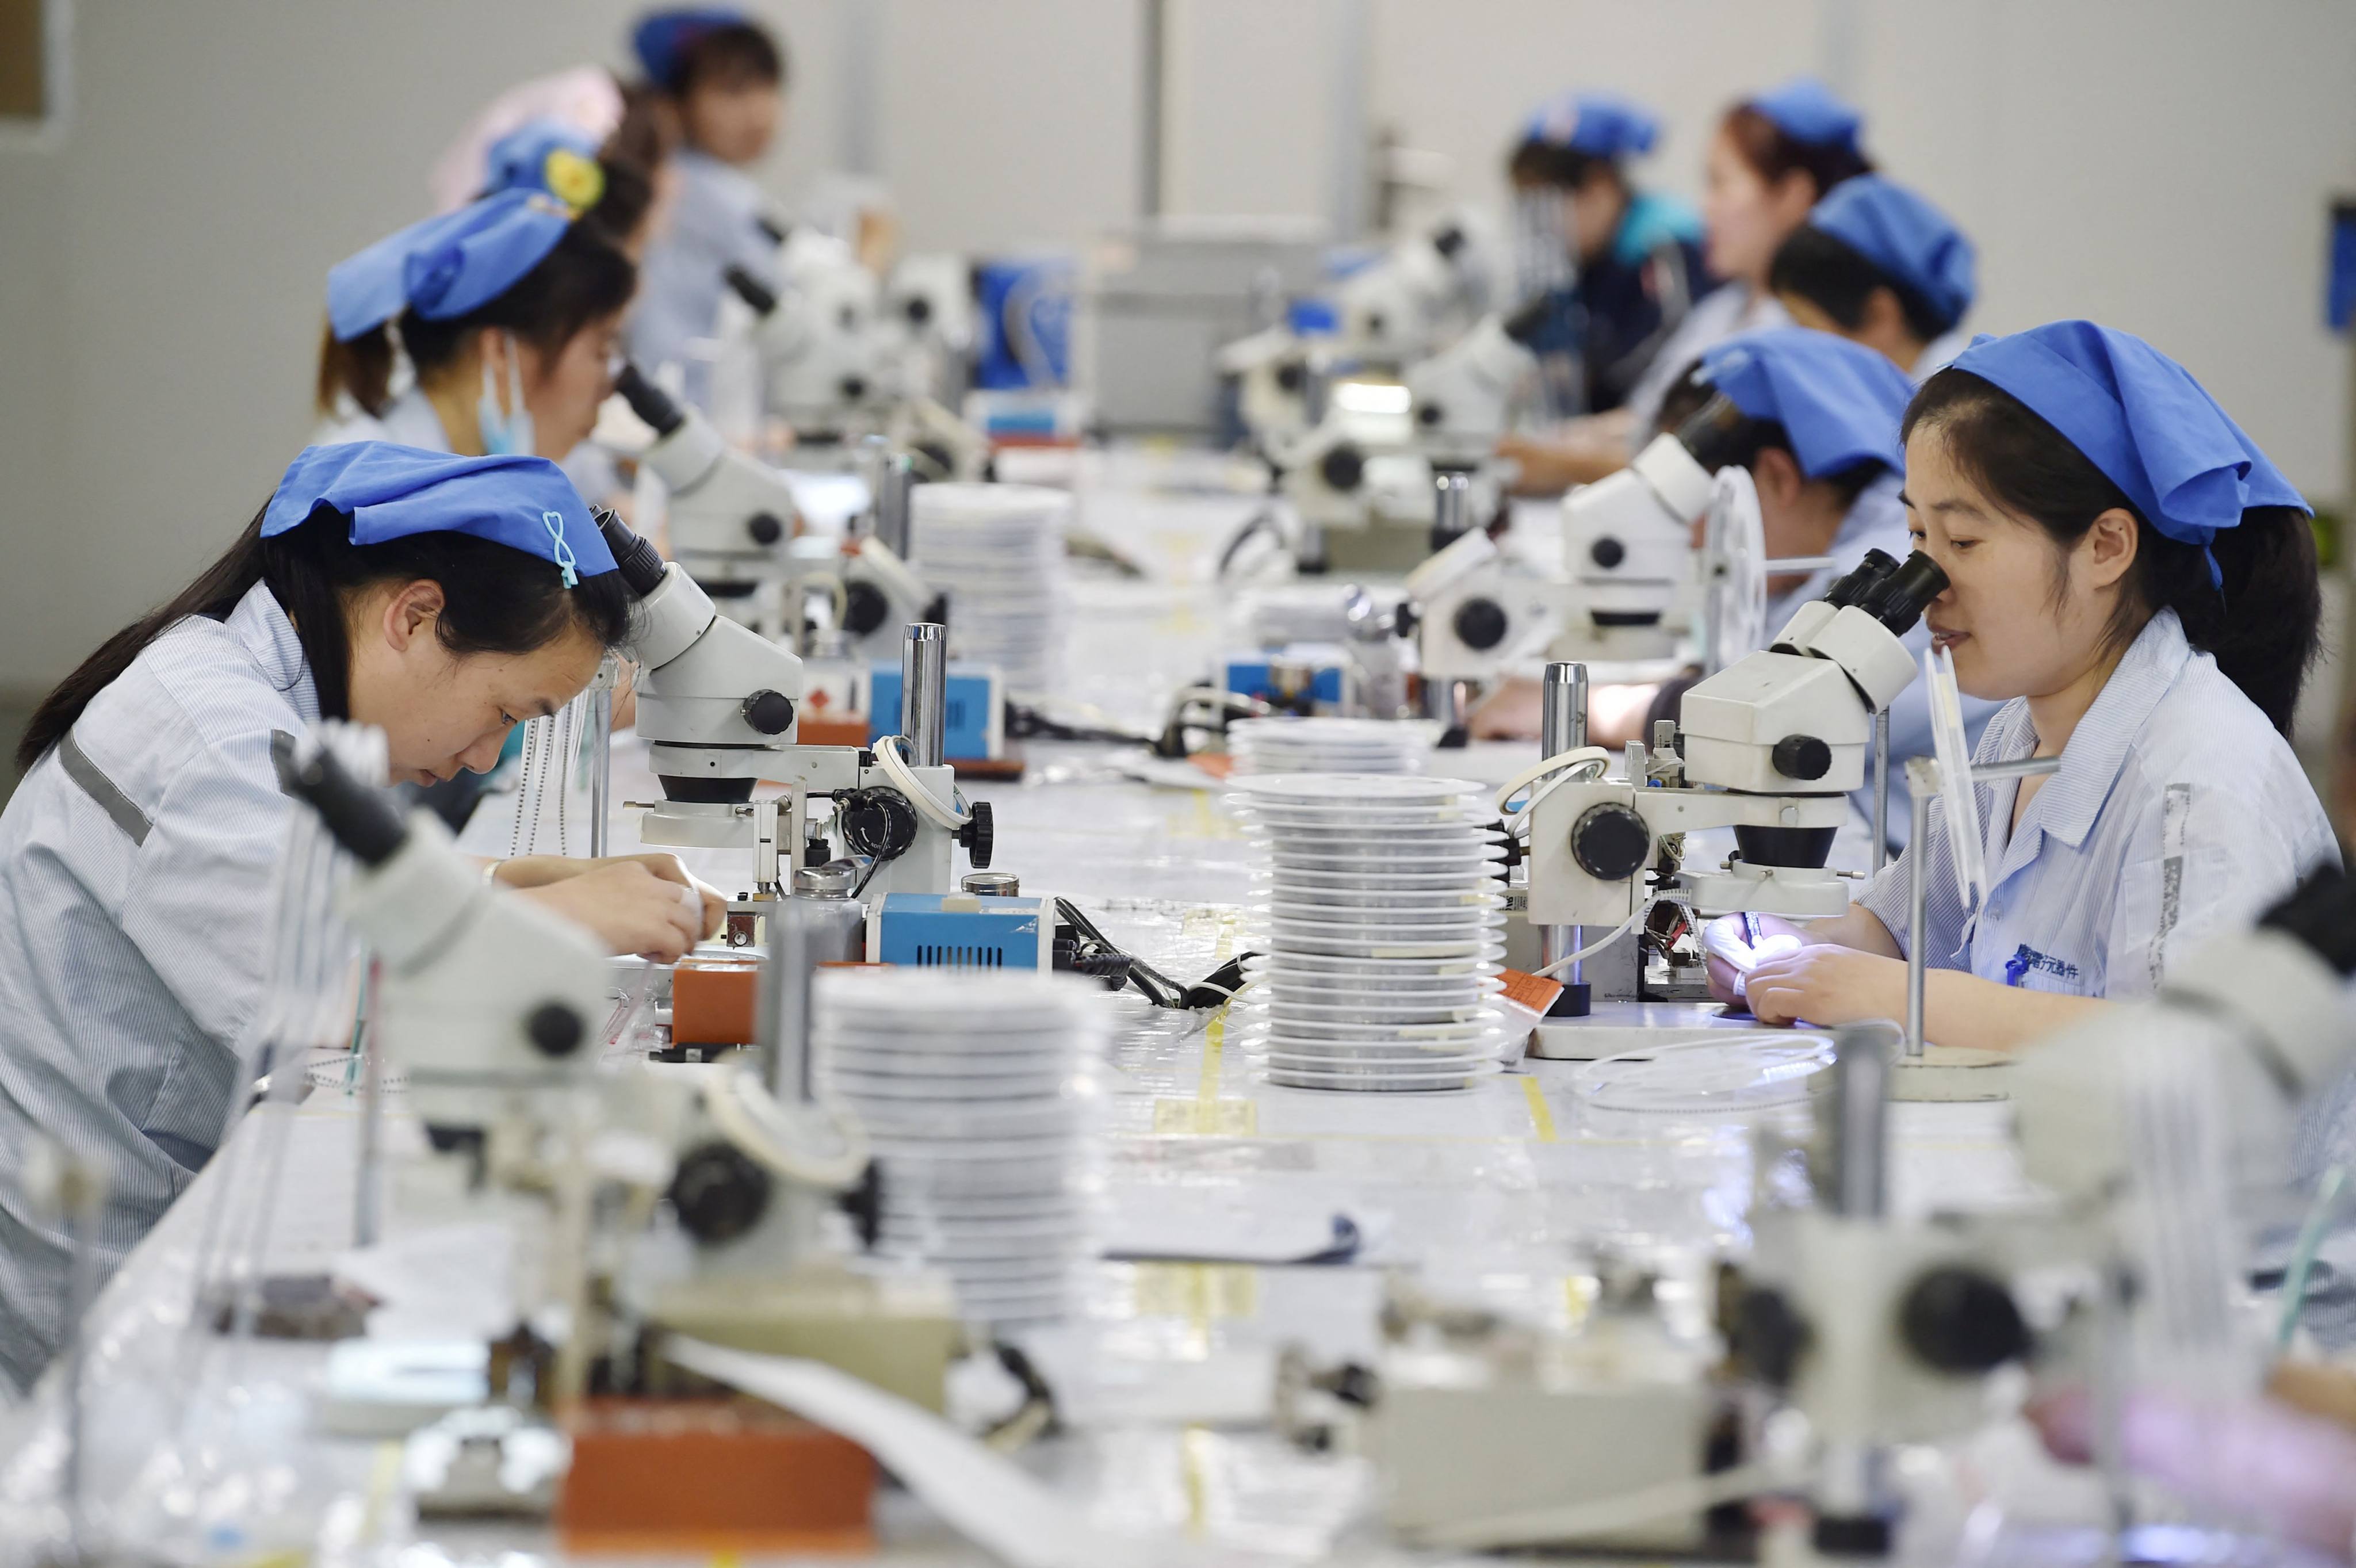 Beijing has urged SOEs to shift their investment focus from infrastructure construction to hi-tech manufacturing in areas such as robotics, pharmaceuticals, mining and clean energy. Photo: AFP